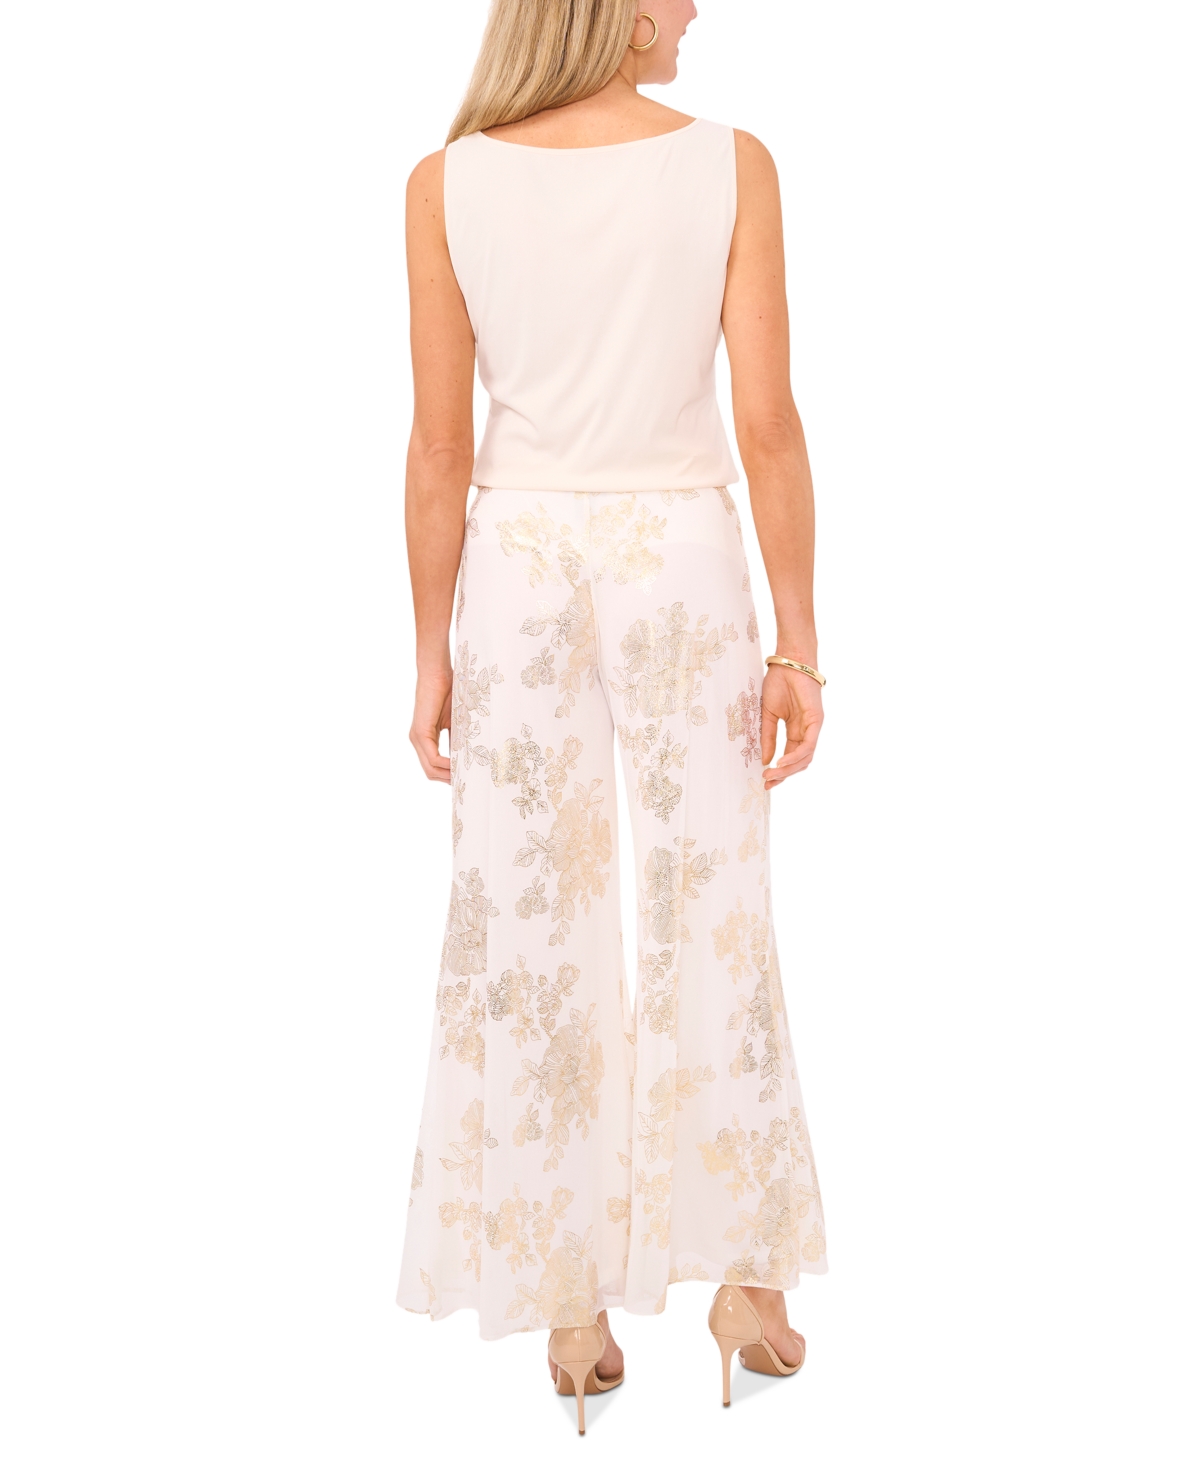 Shop Msk Petite Palazzo Foil-print Wide-leg Pull-on Pants In Ivory,gold